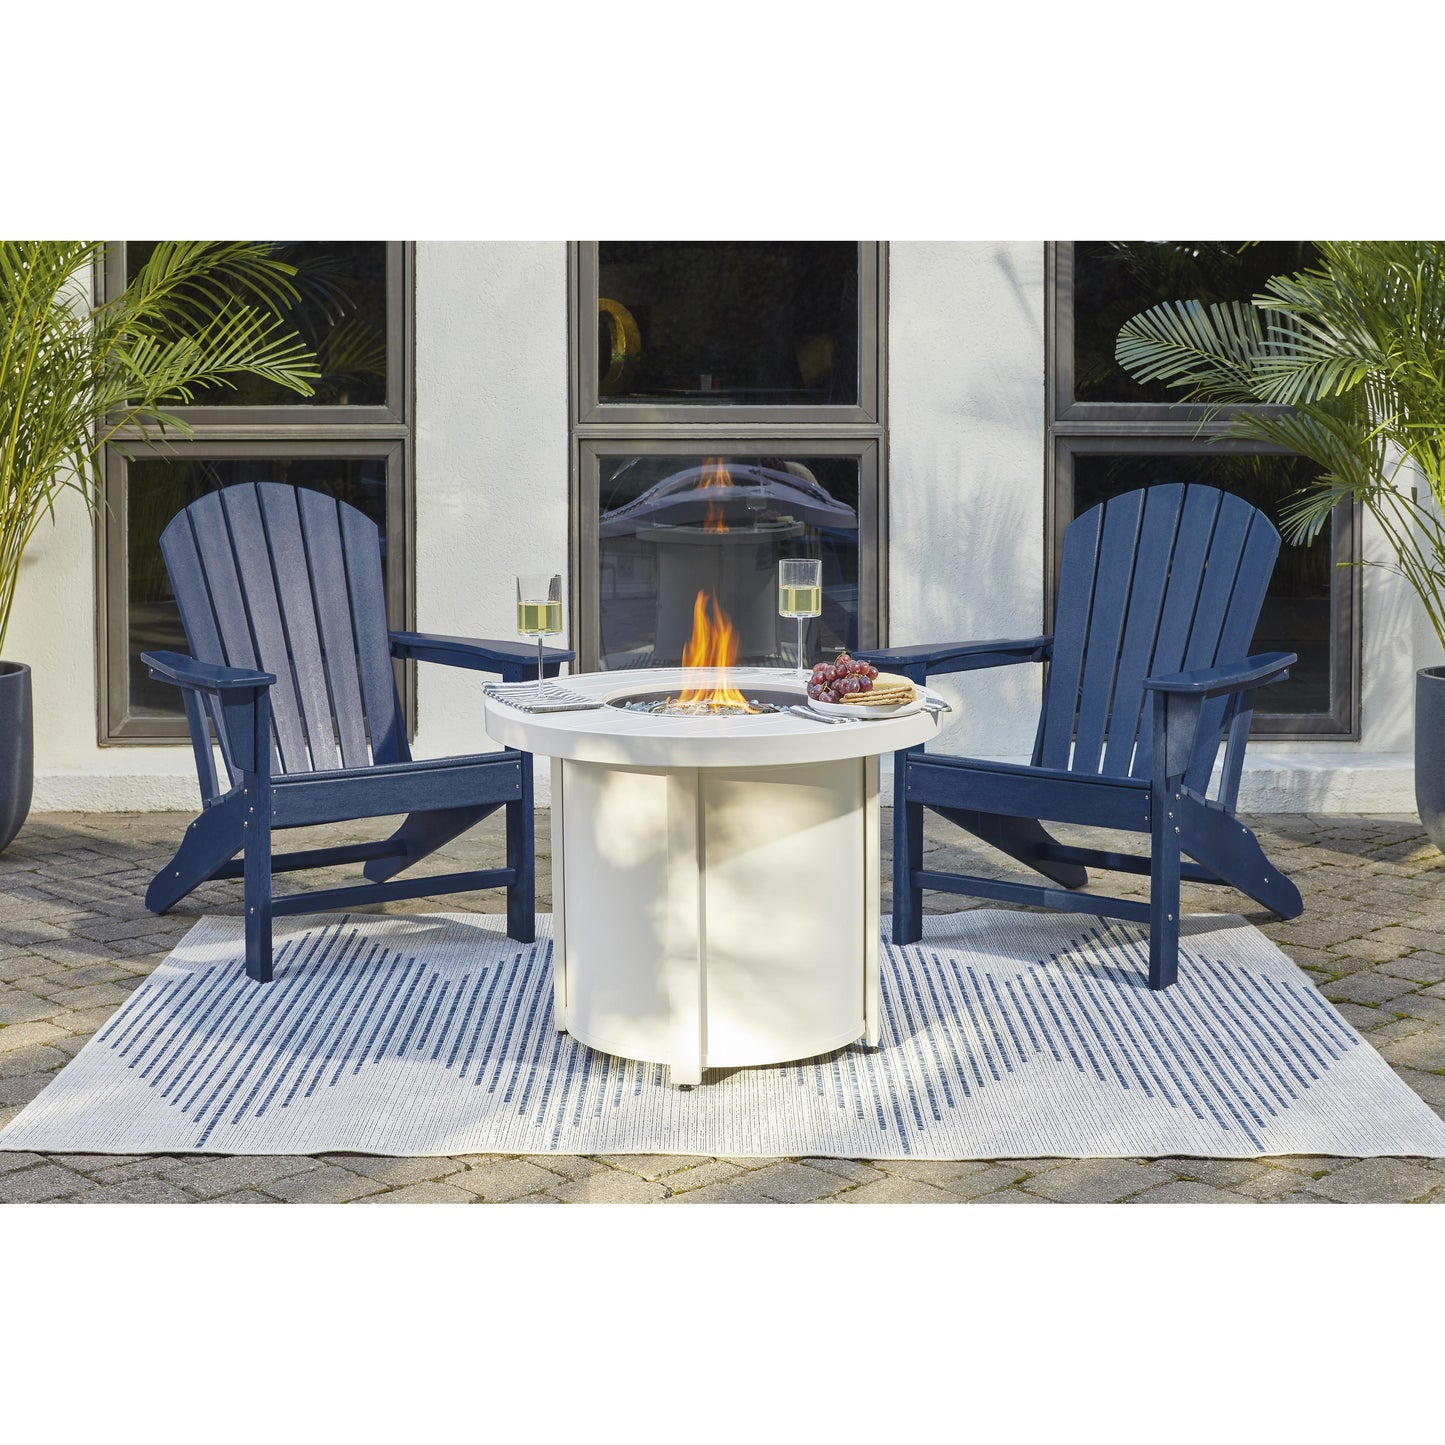 Signature Design by Ashley Outdoor Seating Adirondack Chairs P009-898 IMAGE 8